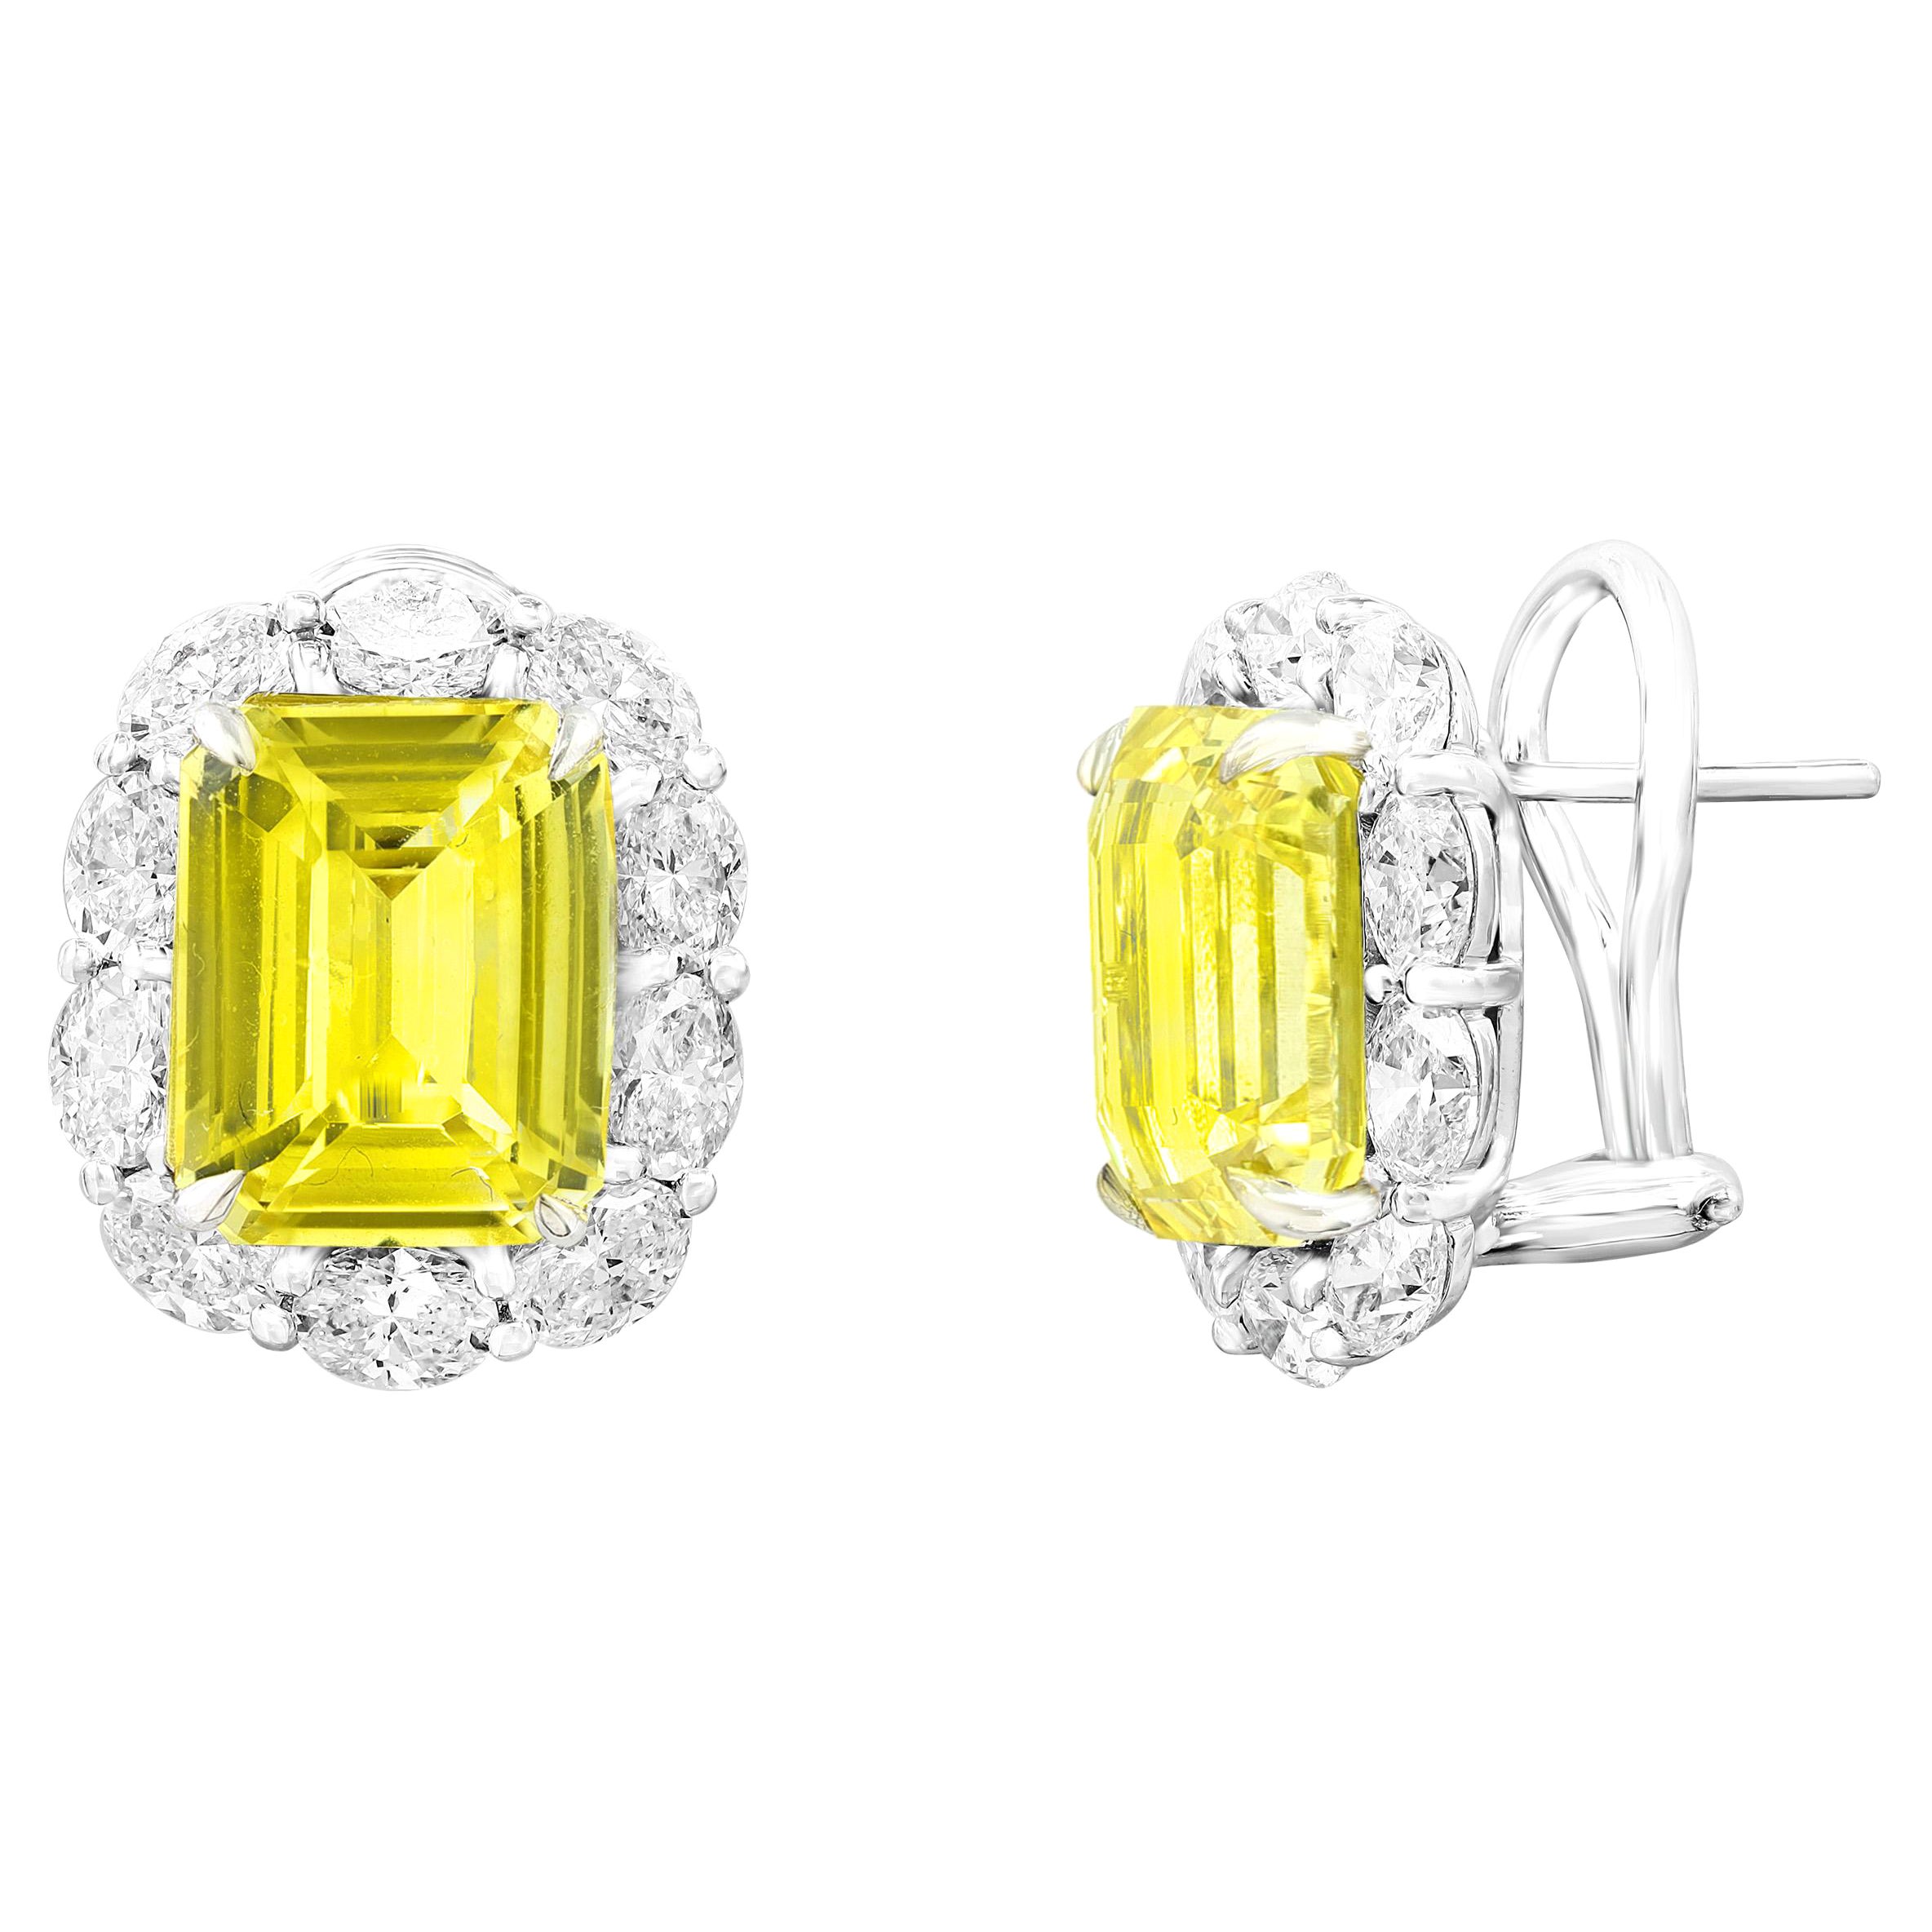 10.09 Carat Emerald Cut Yellow Sapphire Diamond Halo Earring in 18K White Gold For Sale